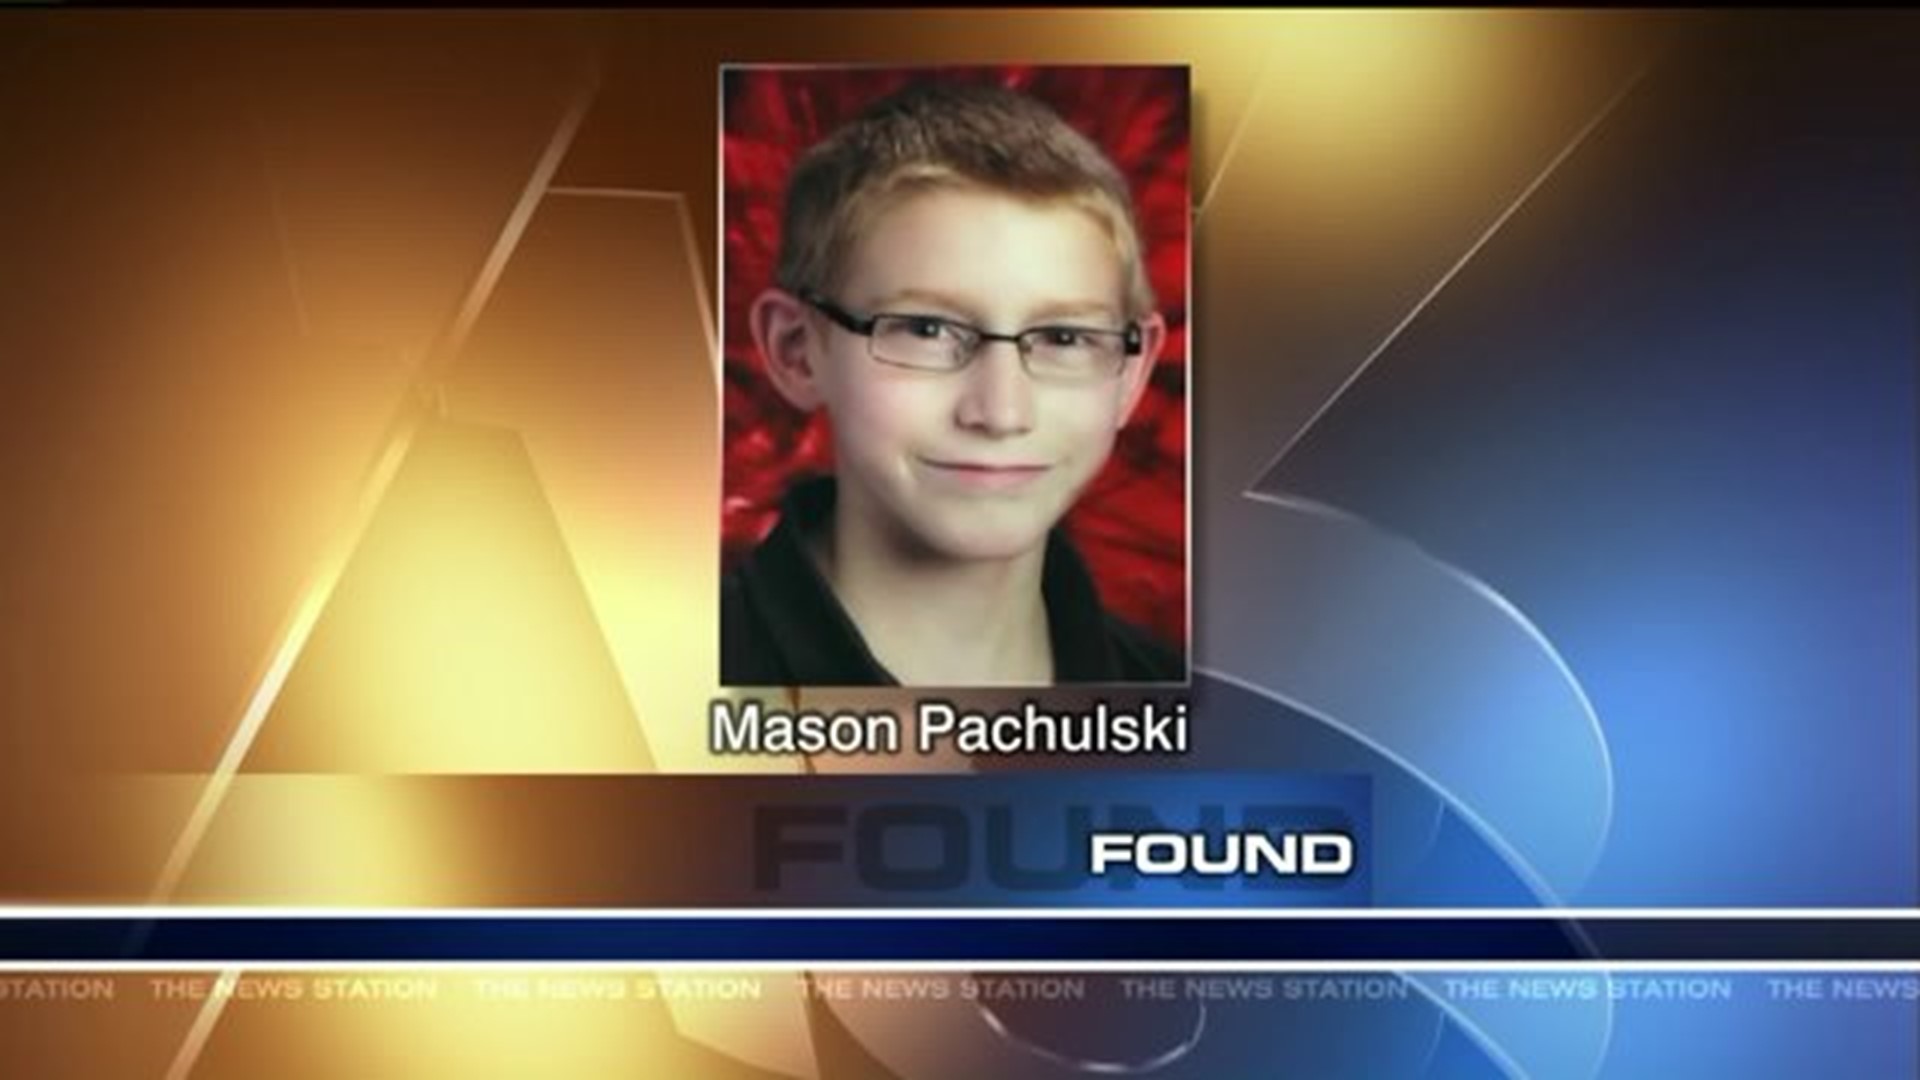 UPDATE: Missing Boy from Jim Thorpe Has Been Found